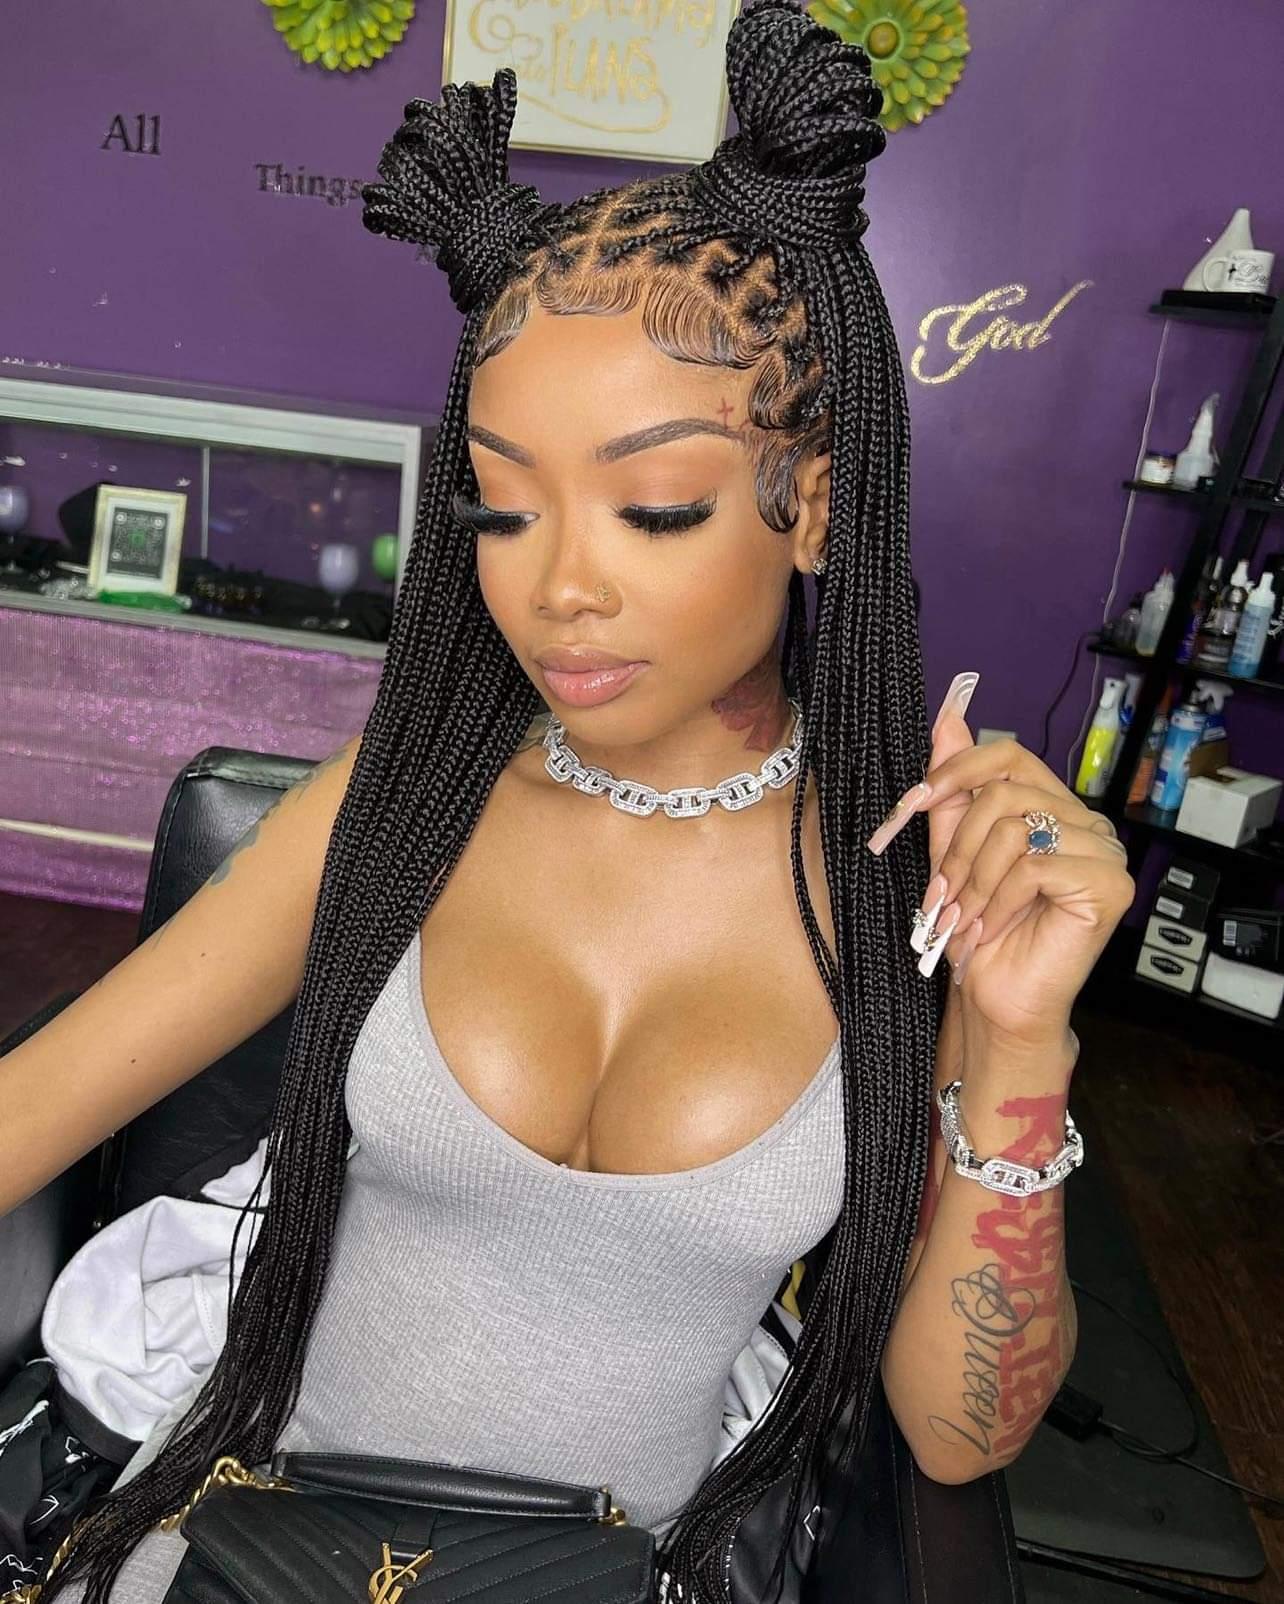 Fabulosity Hair, Knotless braided wigs, Knotless braided wig